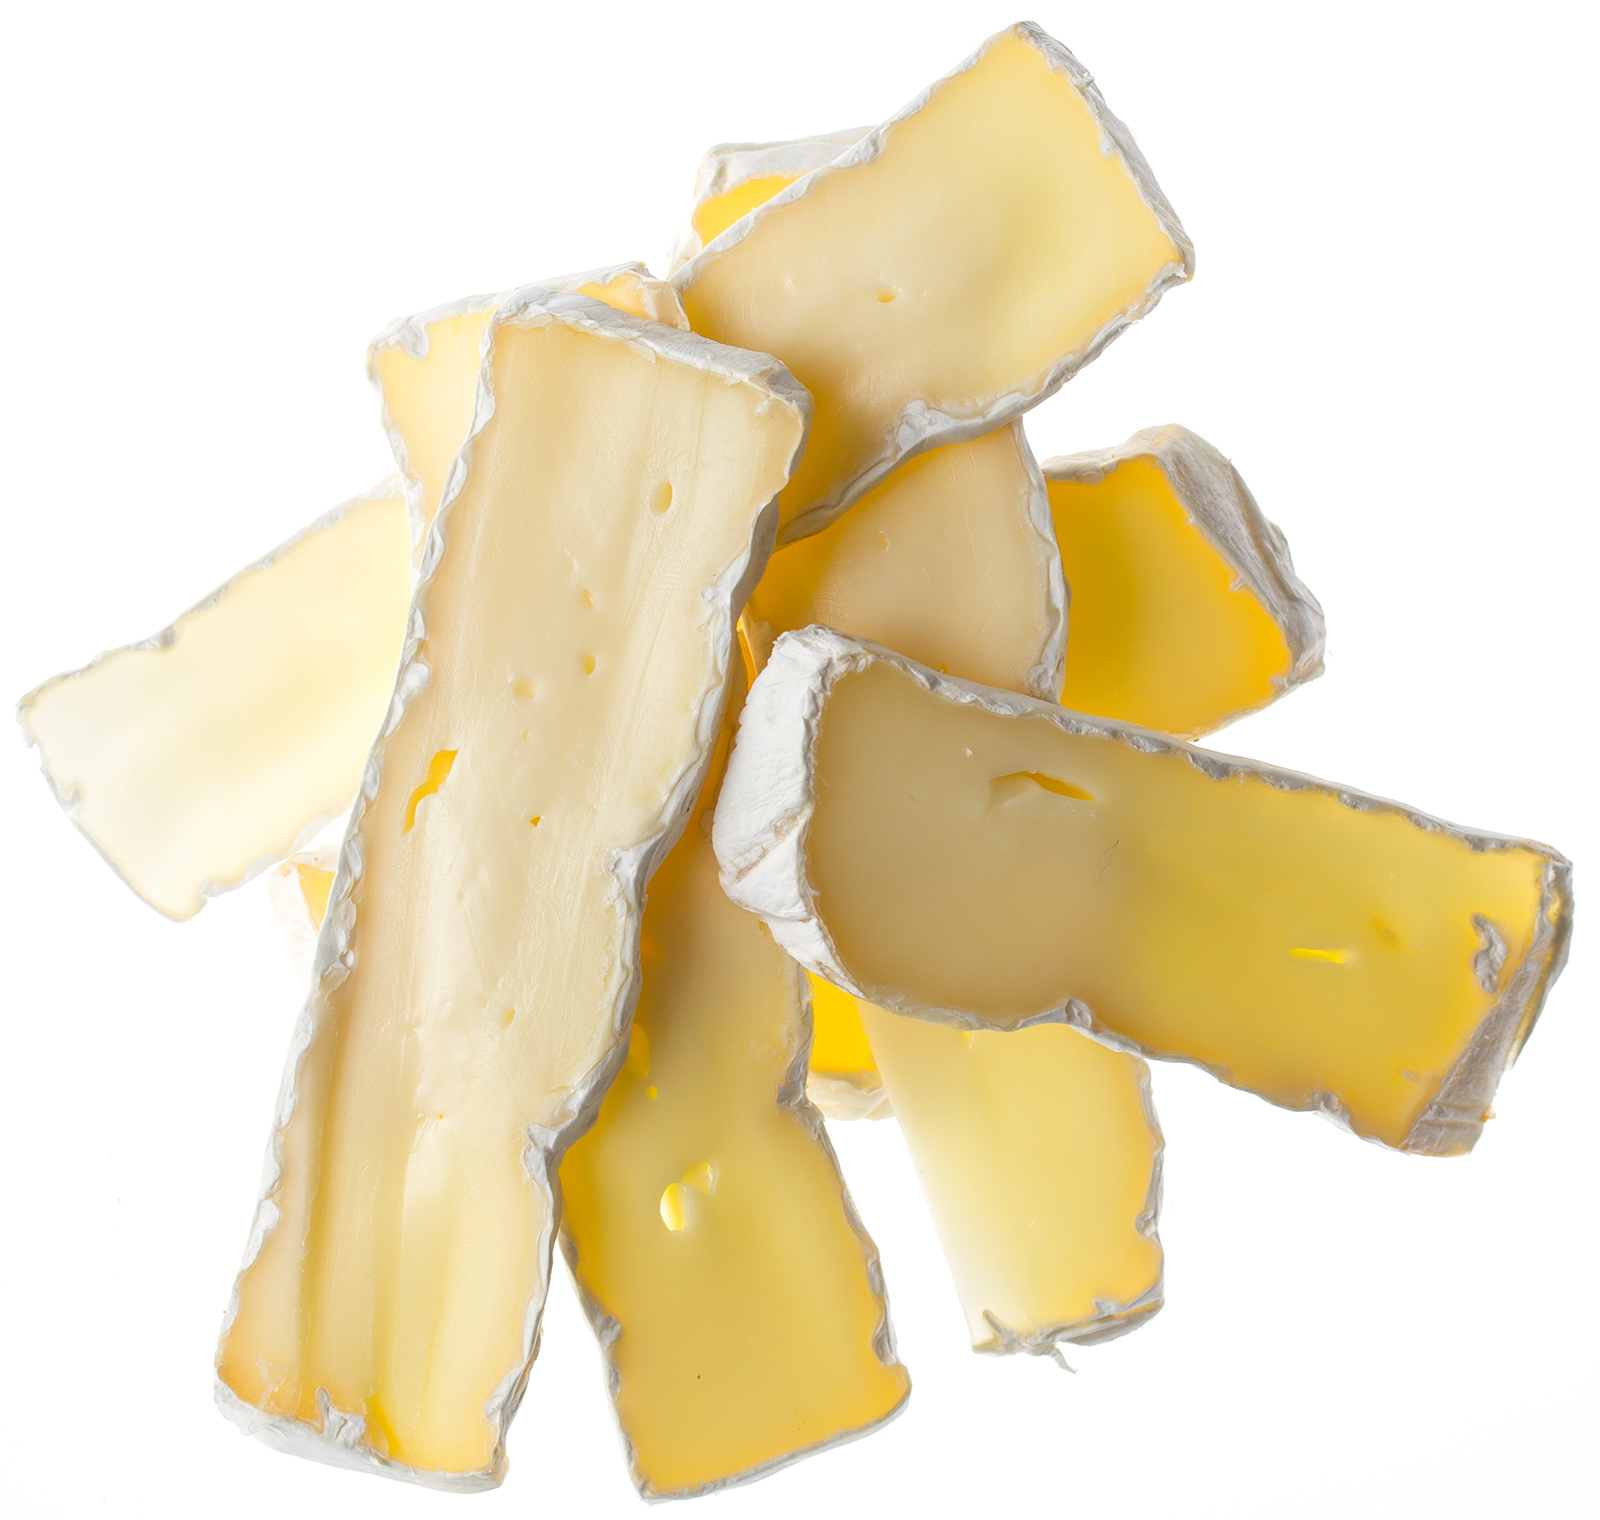 Slices-of-Brie-cheese